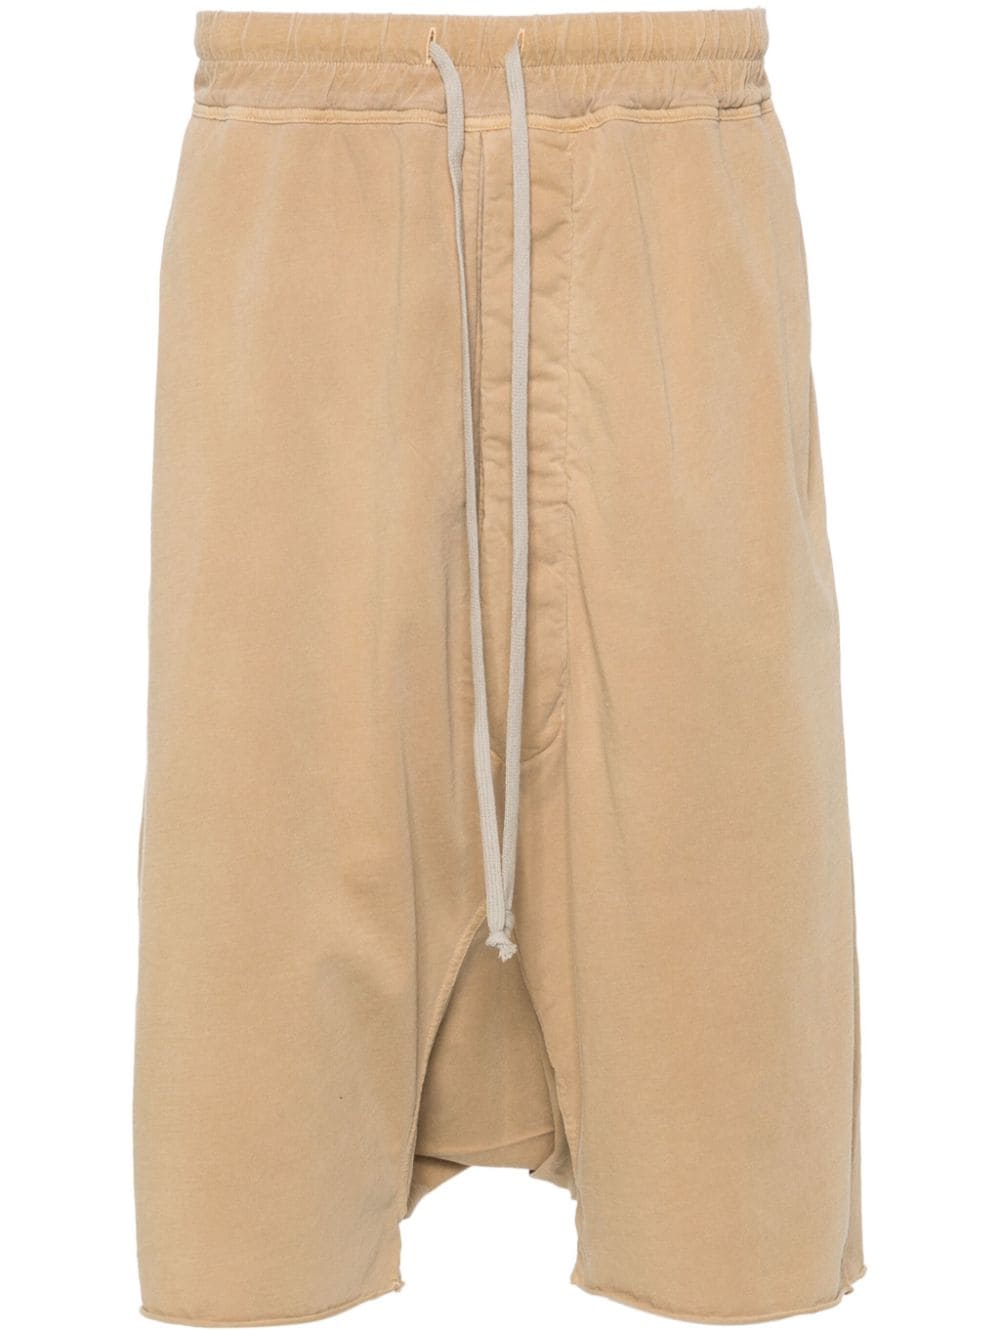 Rick Owens Drkshdw Pods Drop-crotch Shorts In Brown